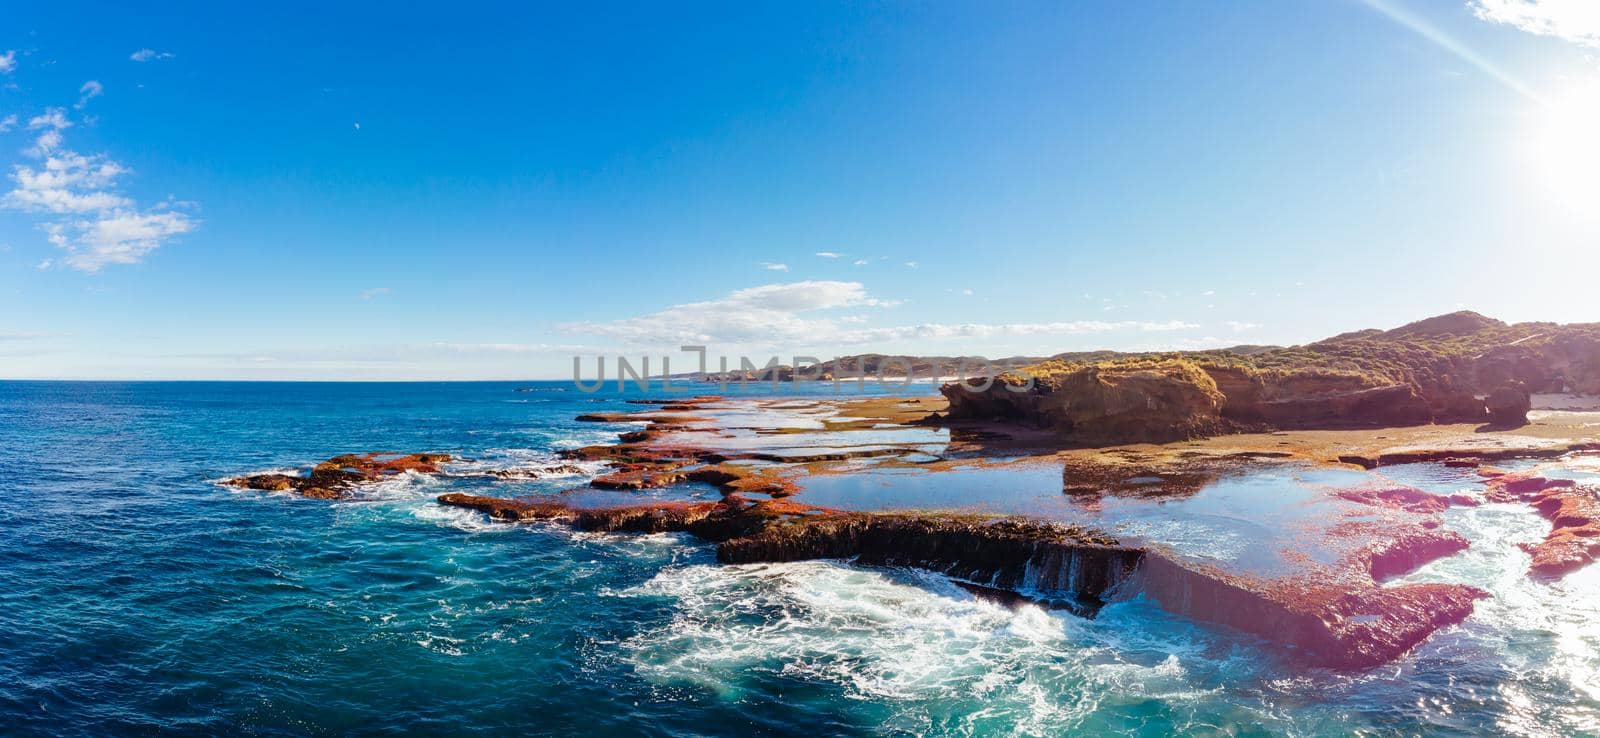 The lesser known Monforts Beach and its rockpool formations on a sunny day in Blairgowrie, Victoria, Australia